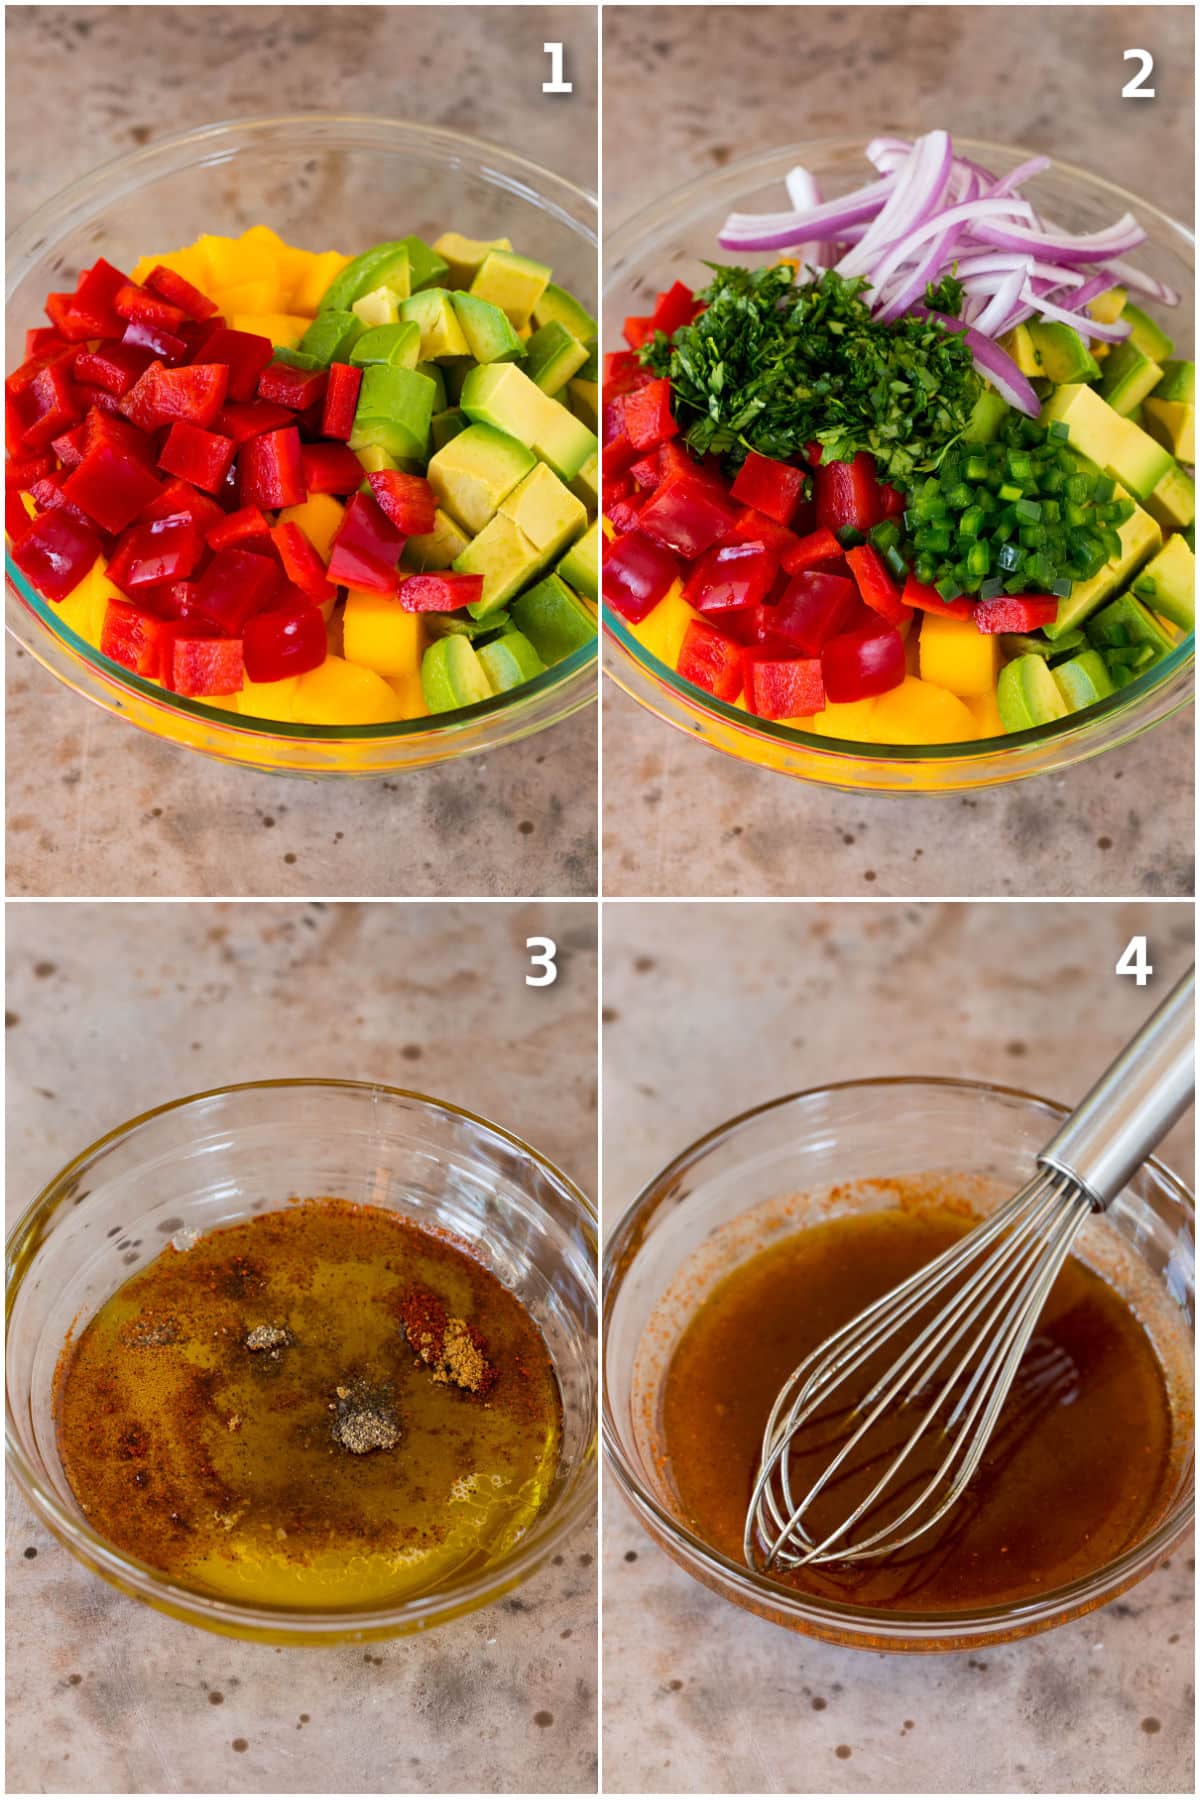 Step by step process shots showing how to make mango salad.